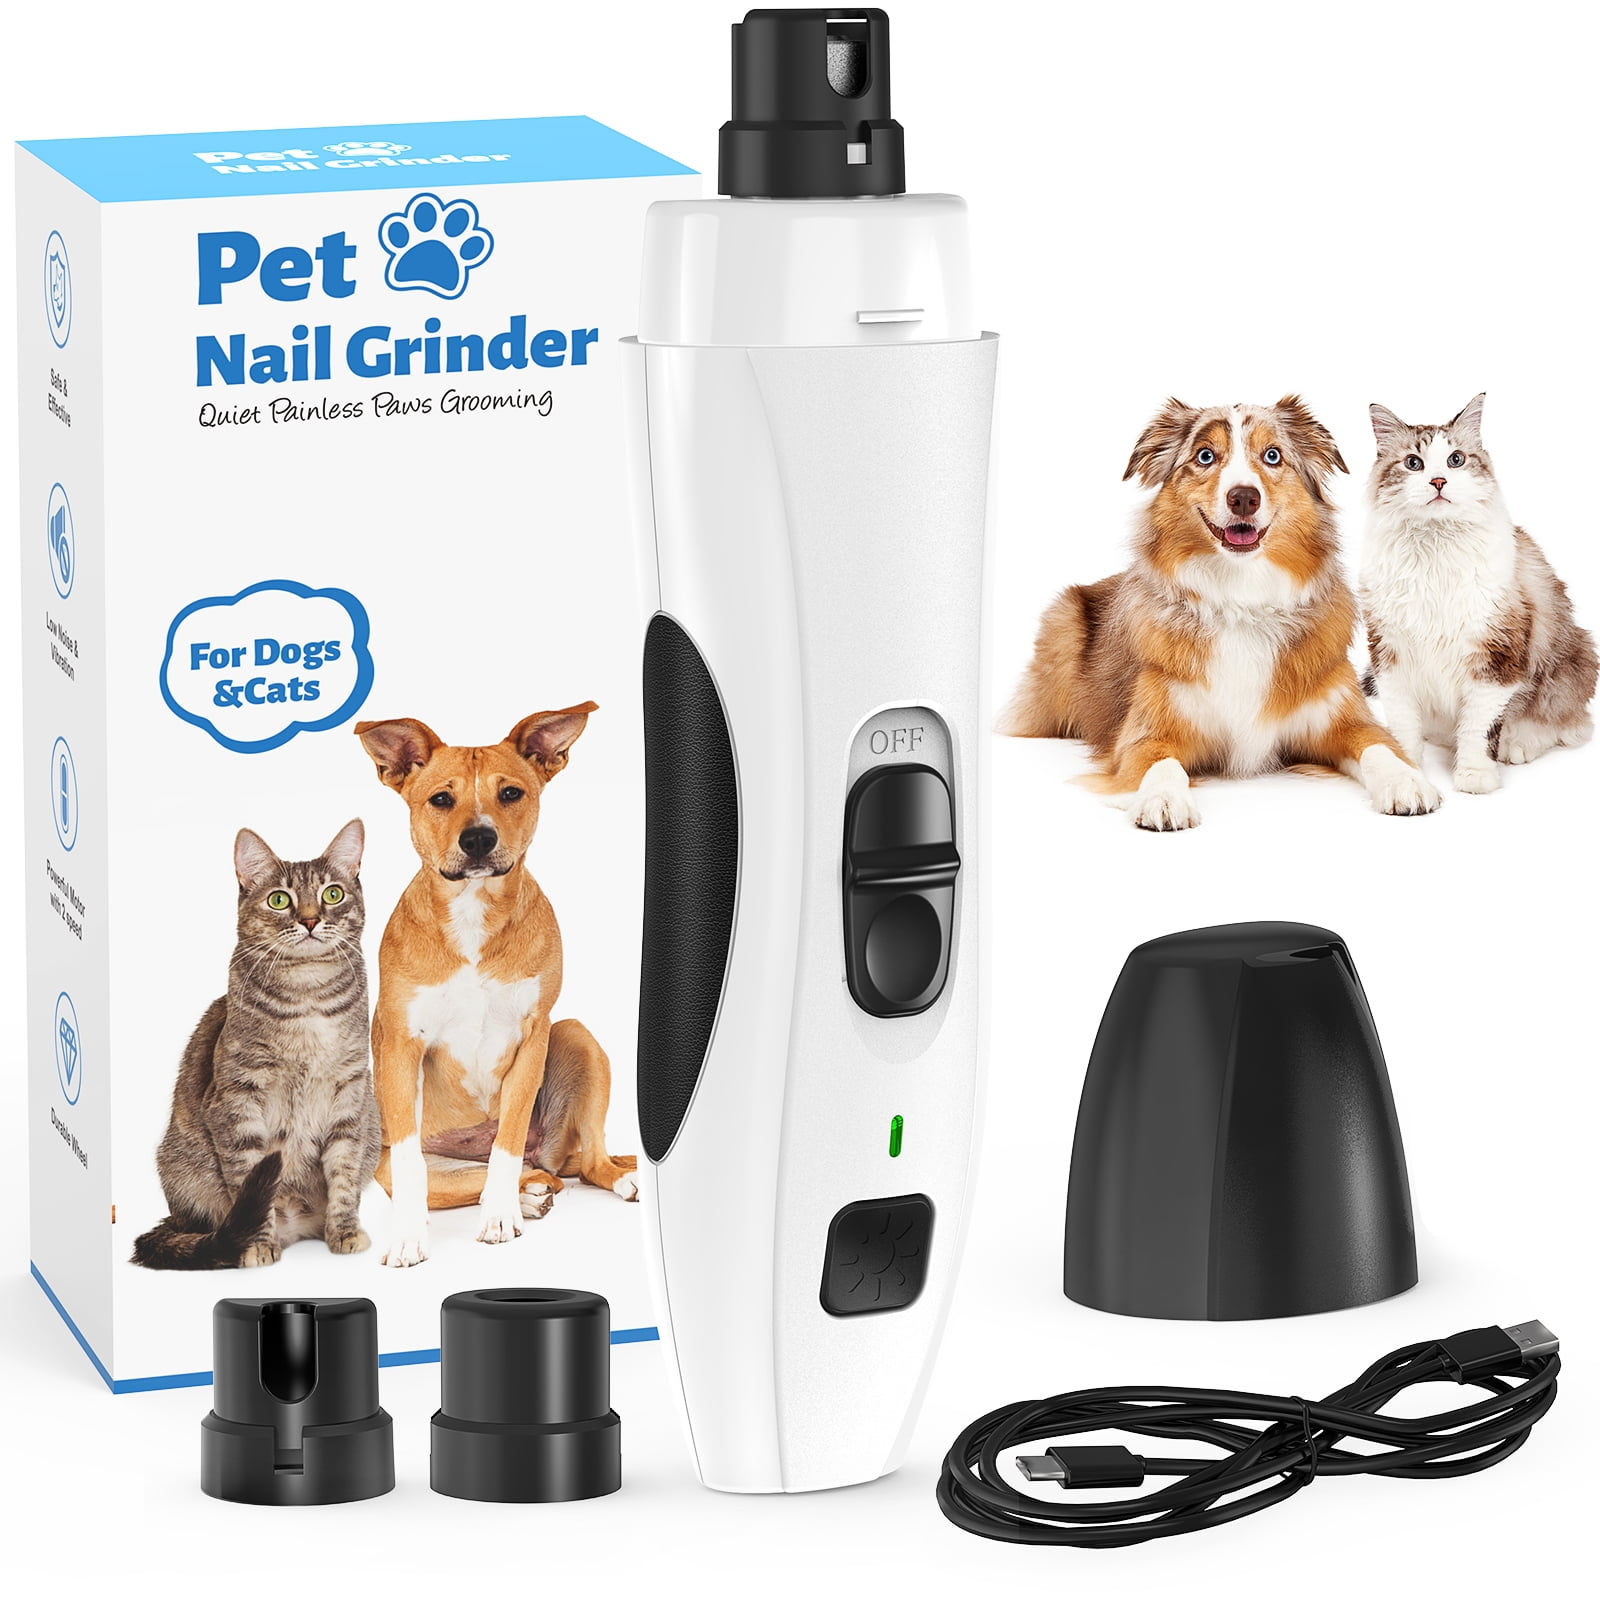 MASBRILL Pet Dog Nail Grinder 2 Speed Electric Rechargeable Pet Nail Trimmer Painless Paws for Small Medium Large Dogs Cats 145b2723 a4f0 408e 8c1f 2bfd2c3306fe.829ca9f8cf7f51a4cc940b95c6f8e5ab